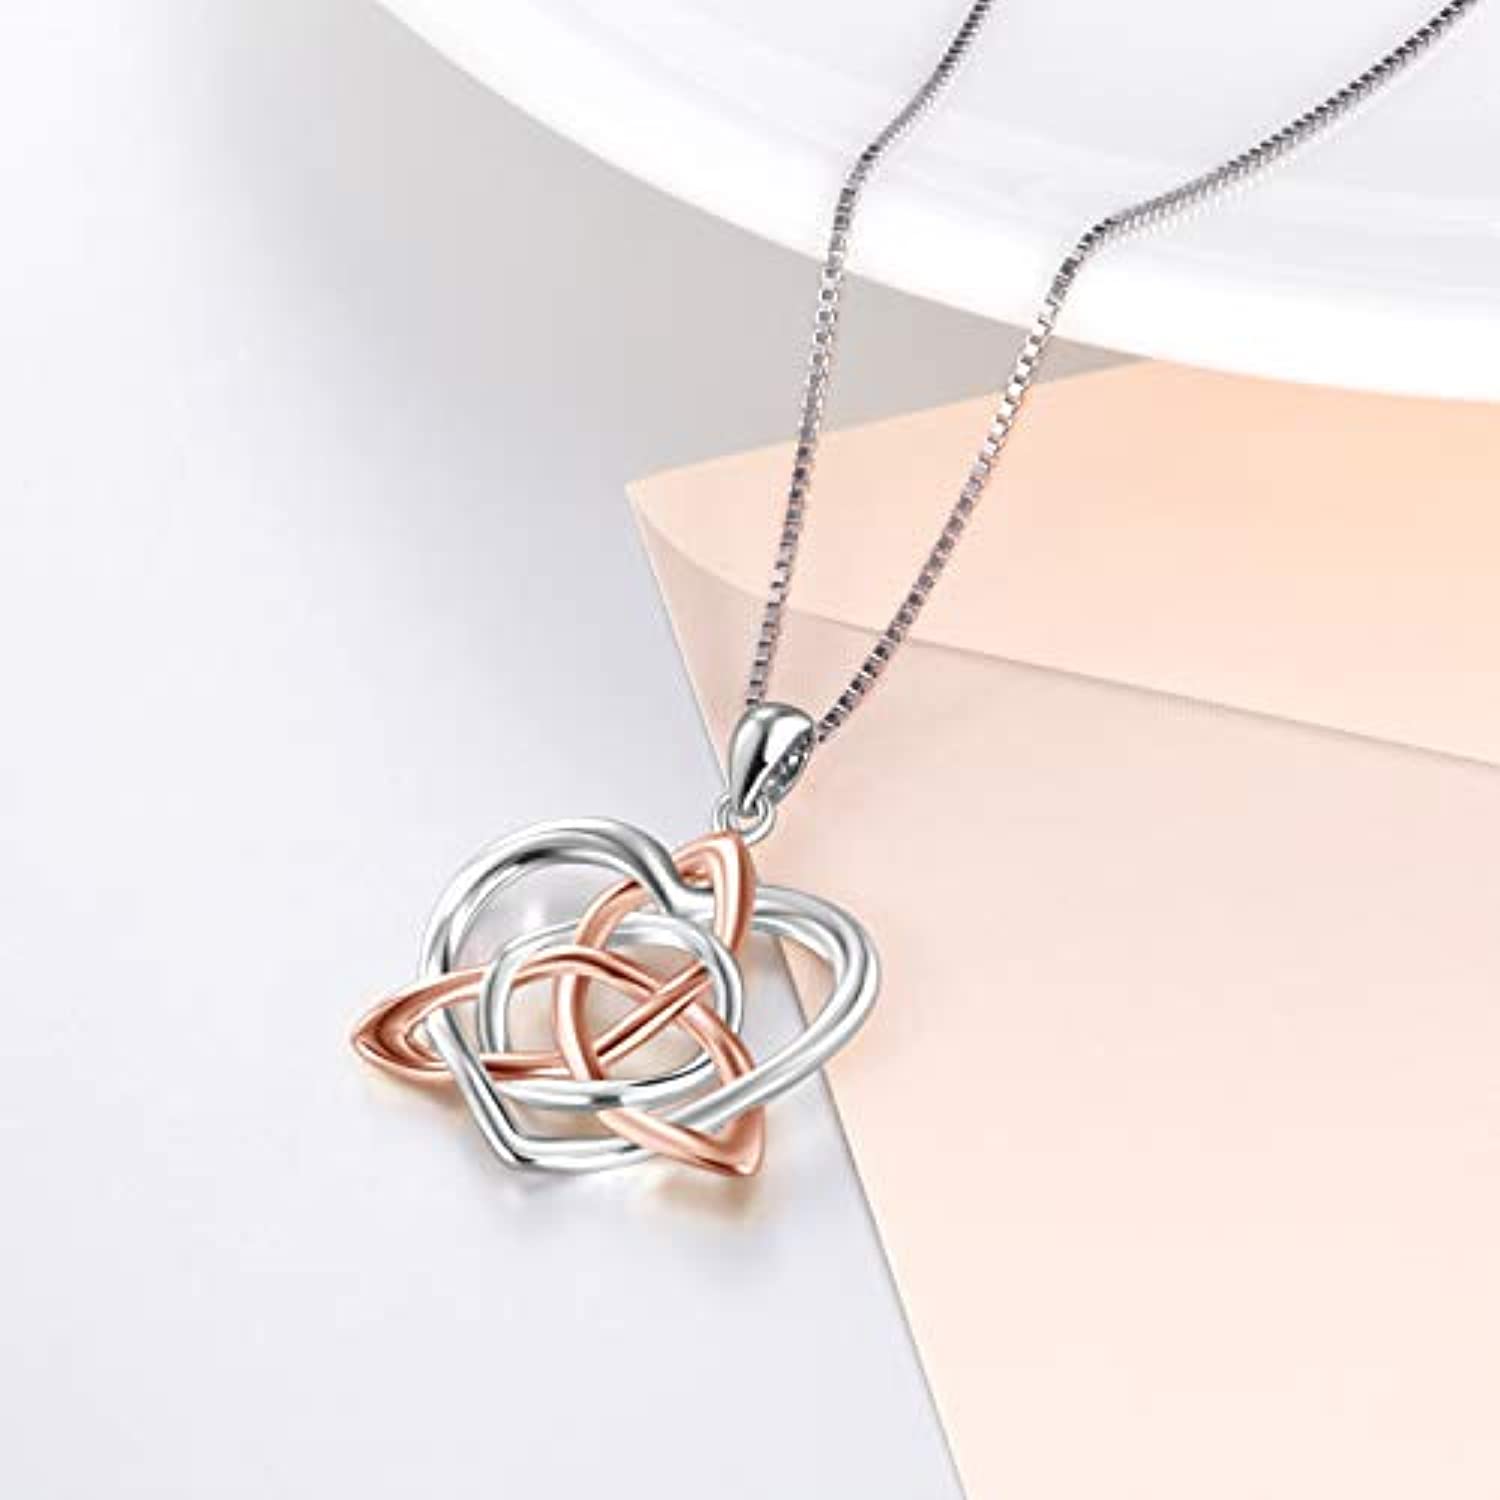 Celtic Love Knot Necklace Jewelry Sterling Silver Good Luck Vintage Triquetra Irish Celtic Love Heart Pendant Necklace for Women Girls